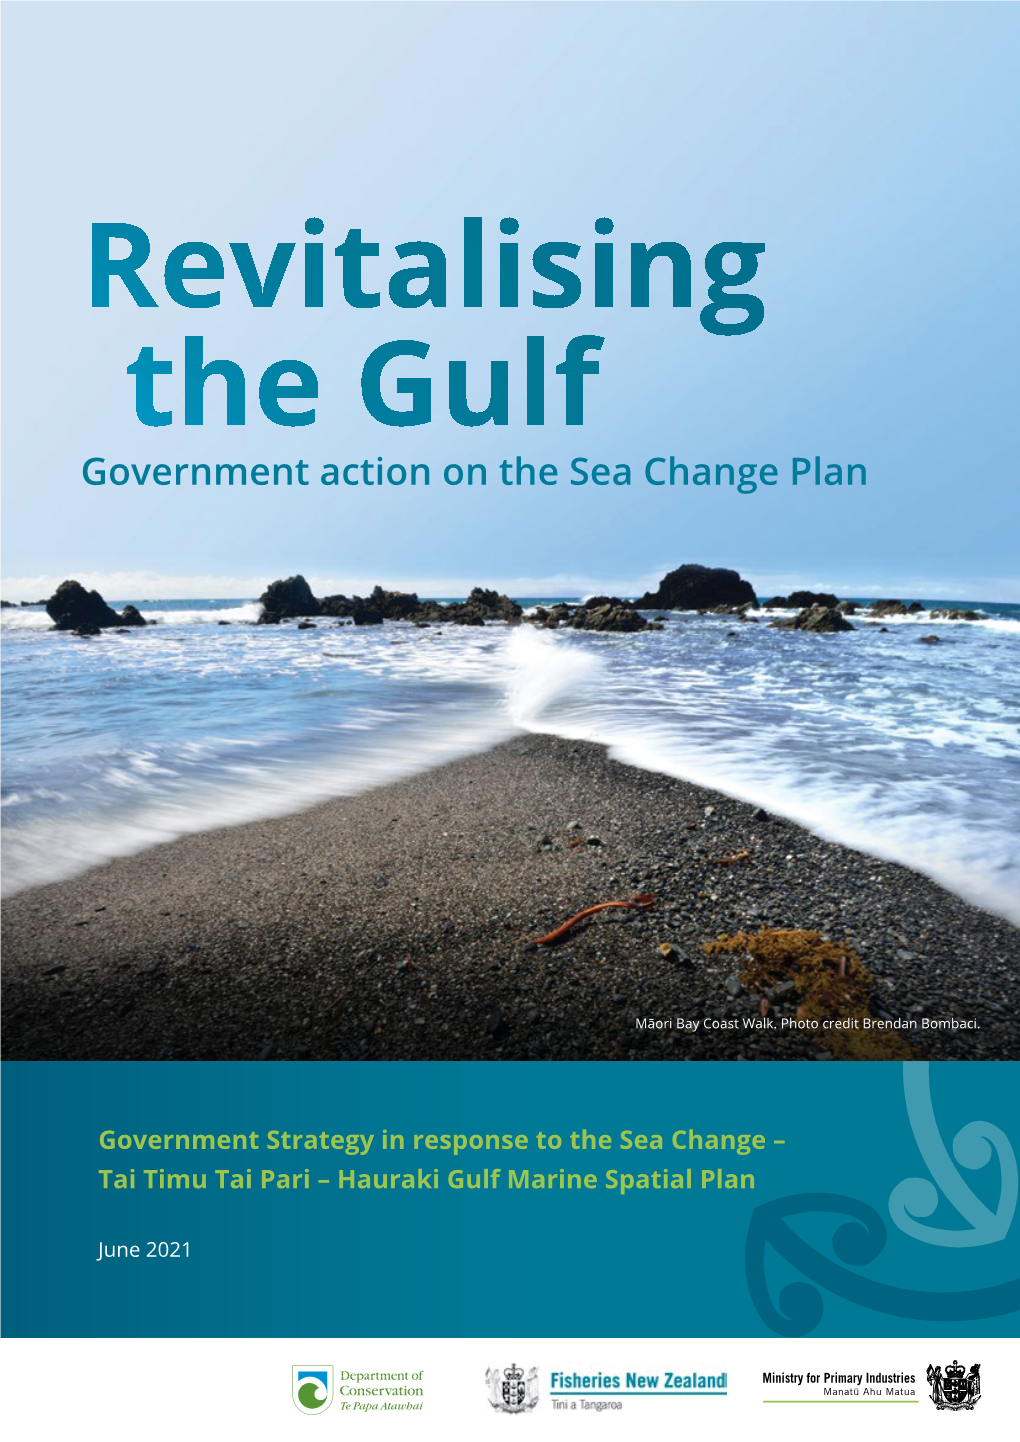 Revitalising the Gulf: Government Action on the Sea Change Plan